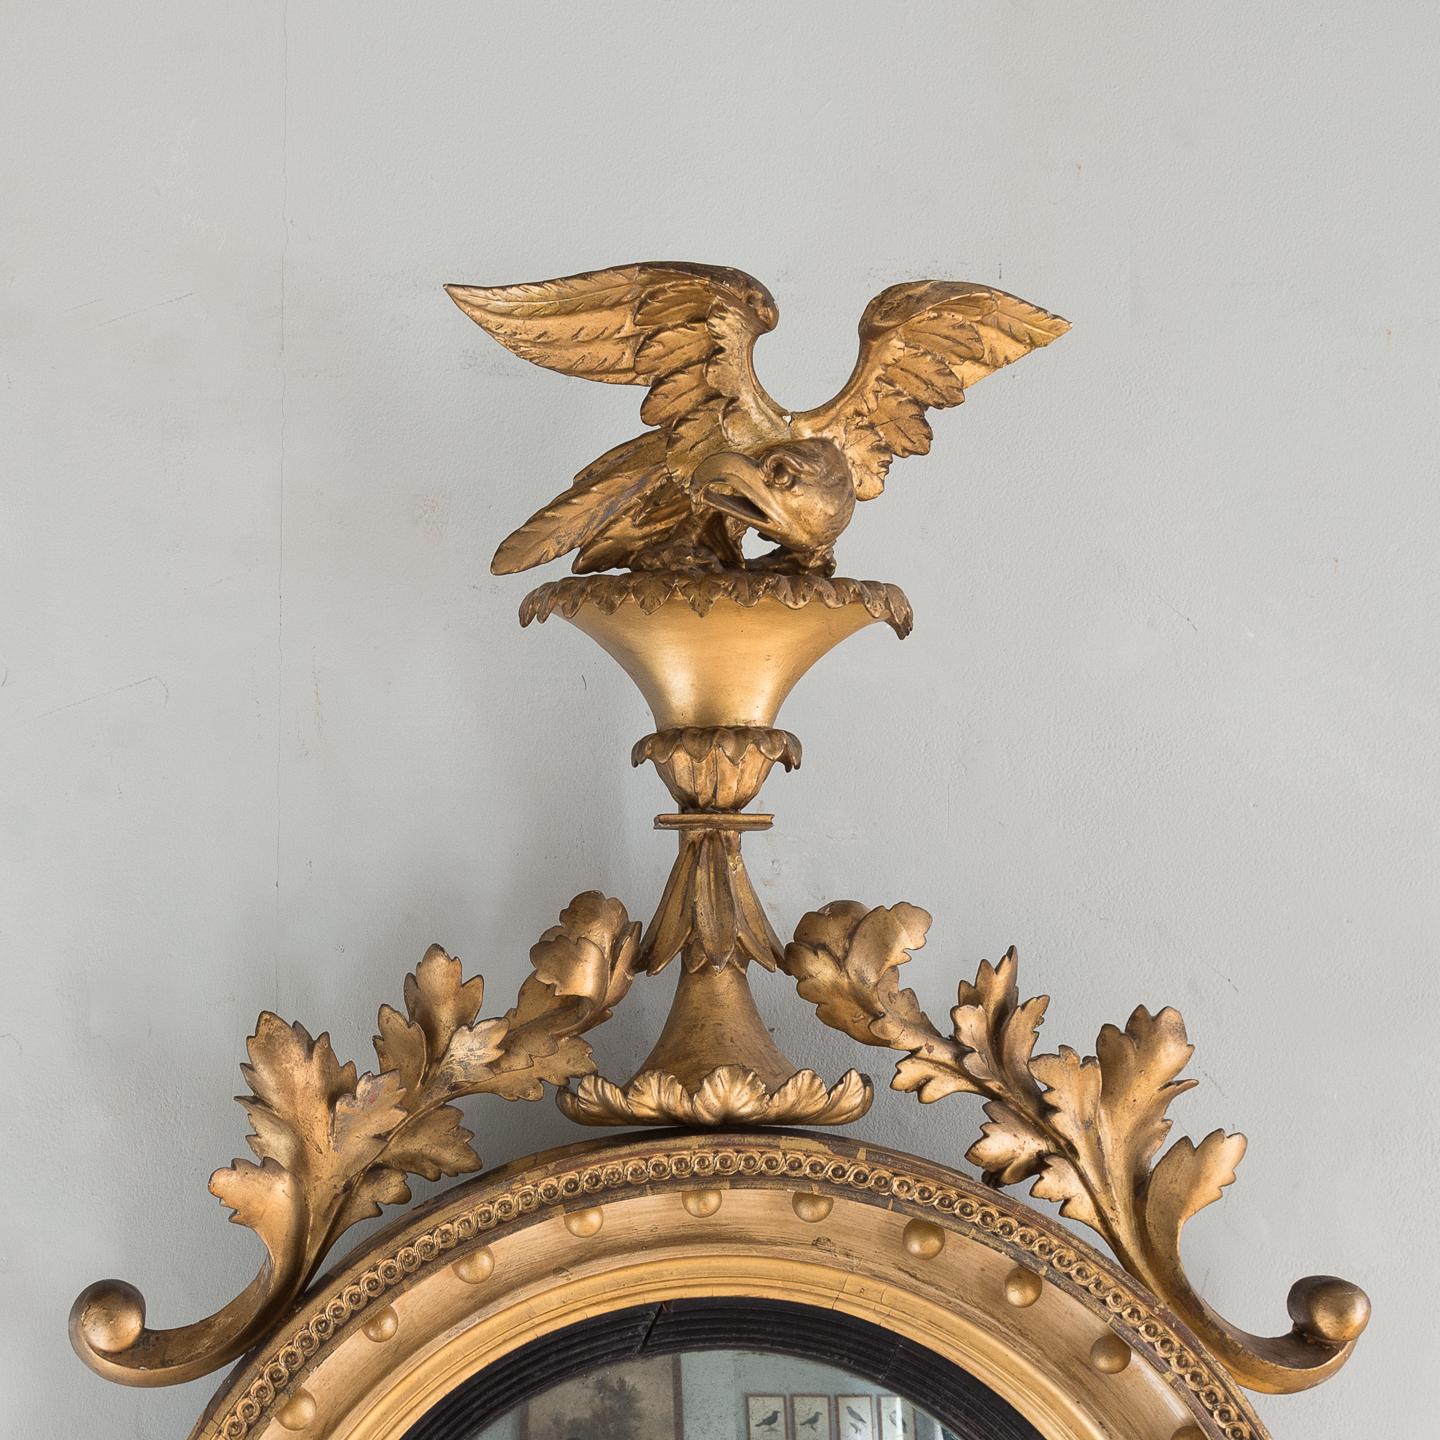 An Regency period giltwood convex mirror, English, circa 1825, having a well carved eagle on a rocky outcrop above interlocking leaf and scrolls leading to detailed circular frame including giltwood ball decoration, reeded ebonised slip and foxed